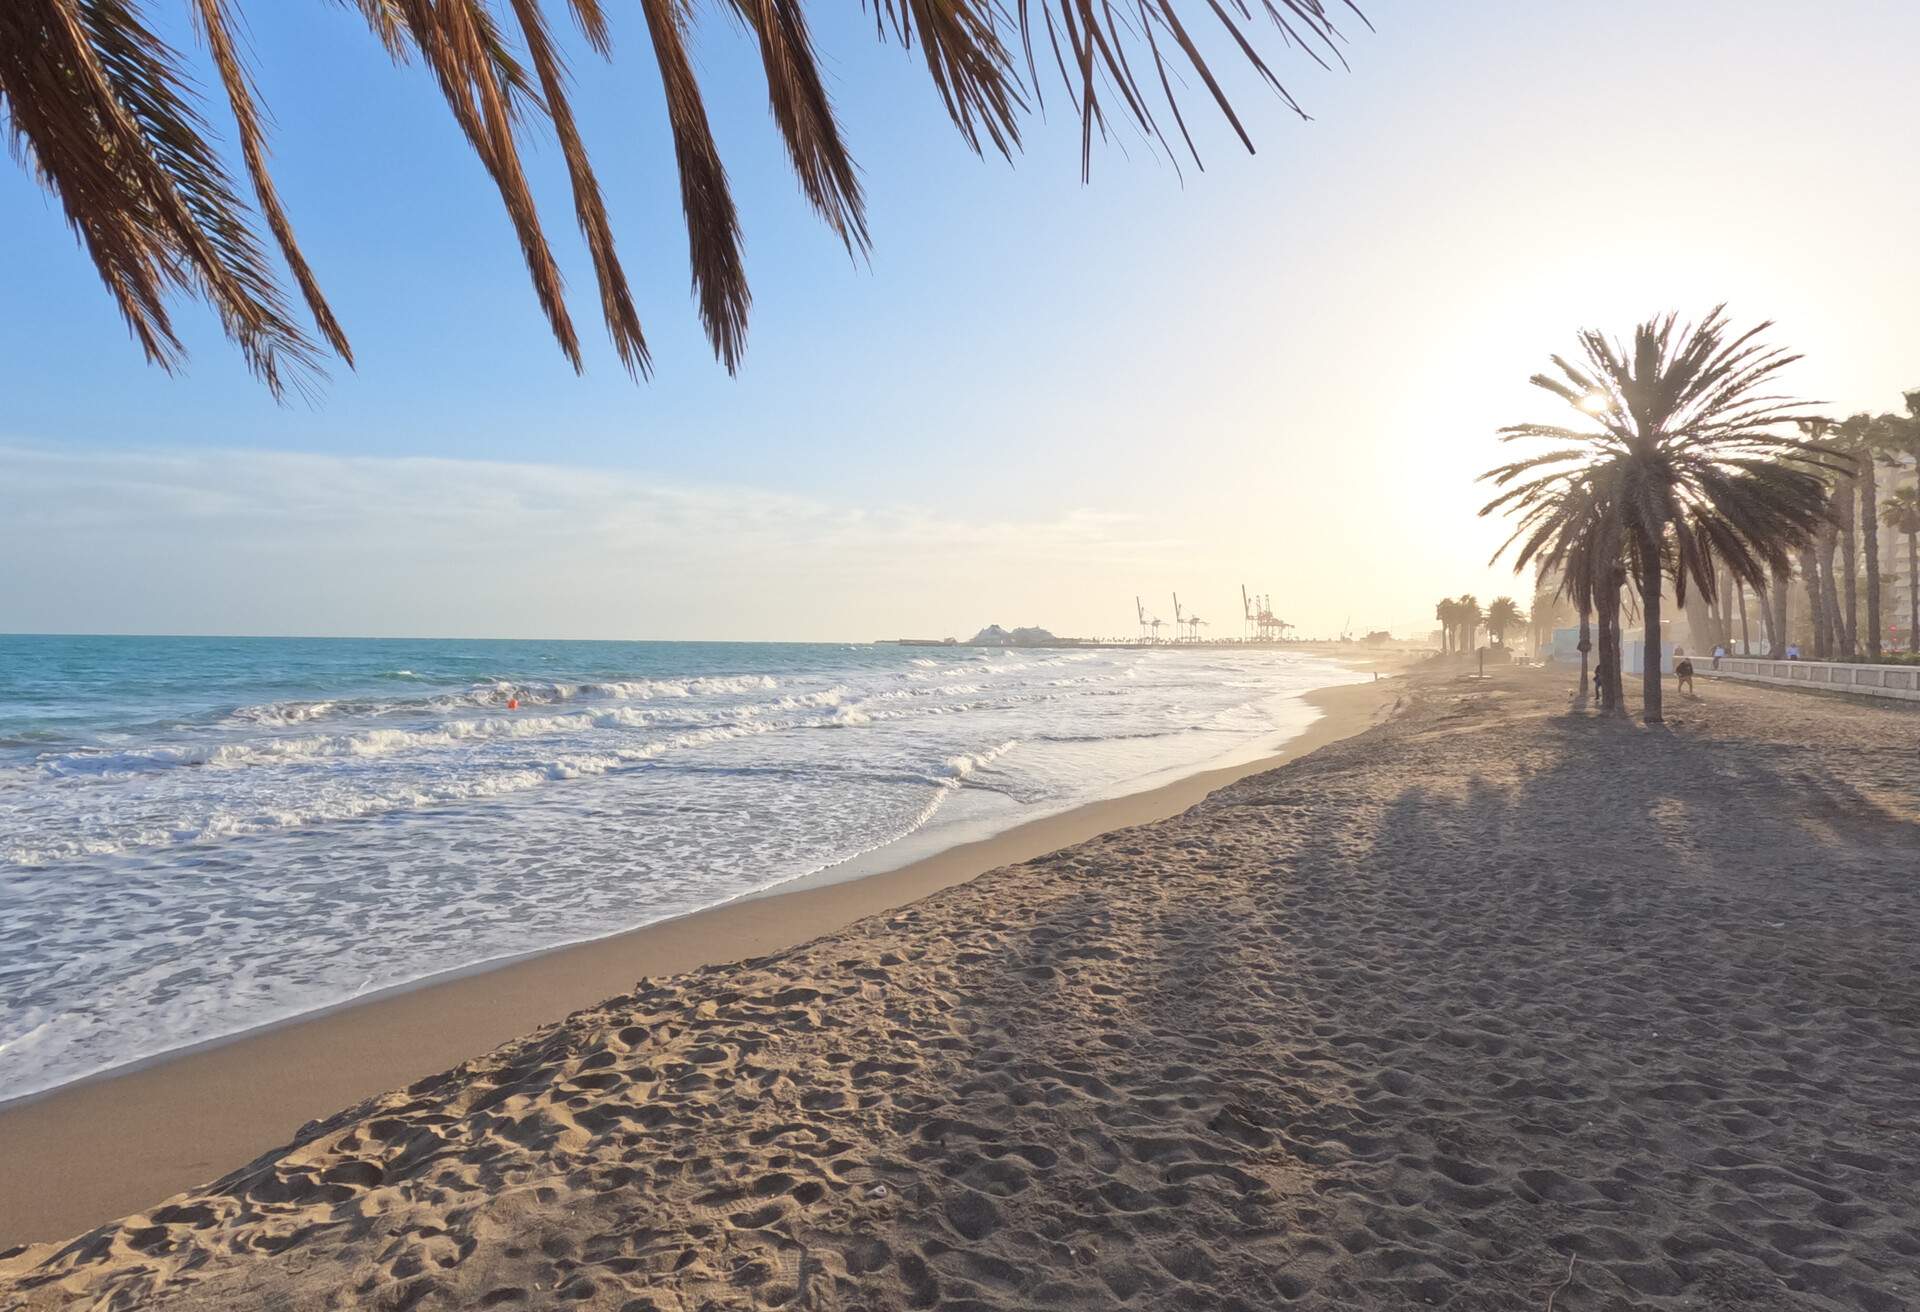 La Malagueta urban sand beach with palm trees promenade at sunriset golden light on the Costa del Sol, one of the most famous beaches for both tourists and locals in Malaga city center, Spain, Europe